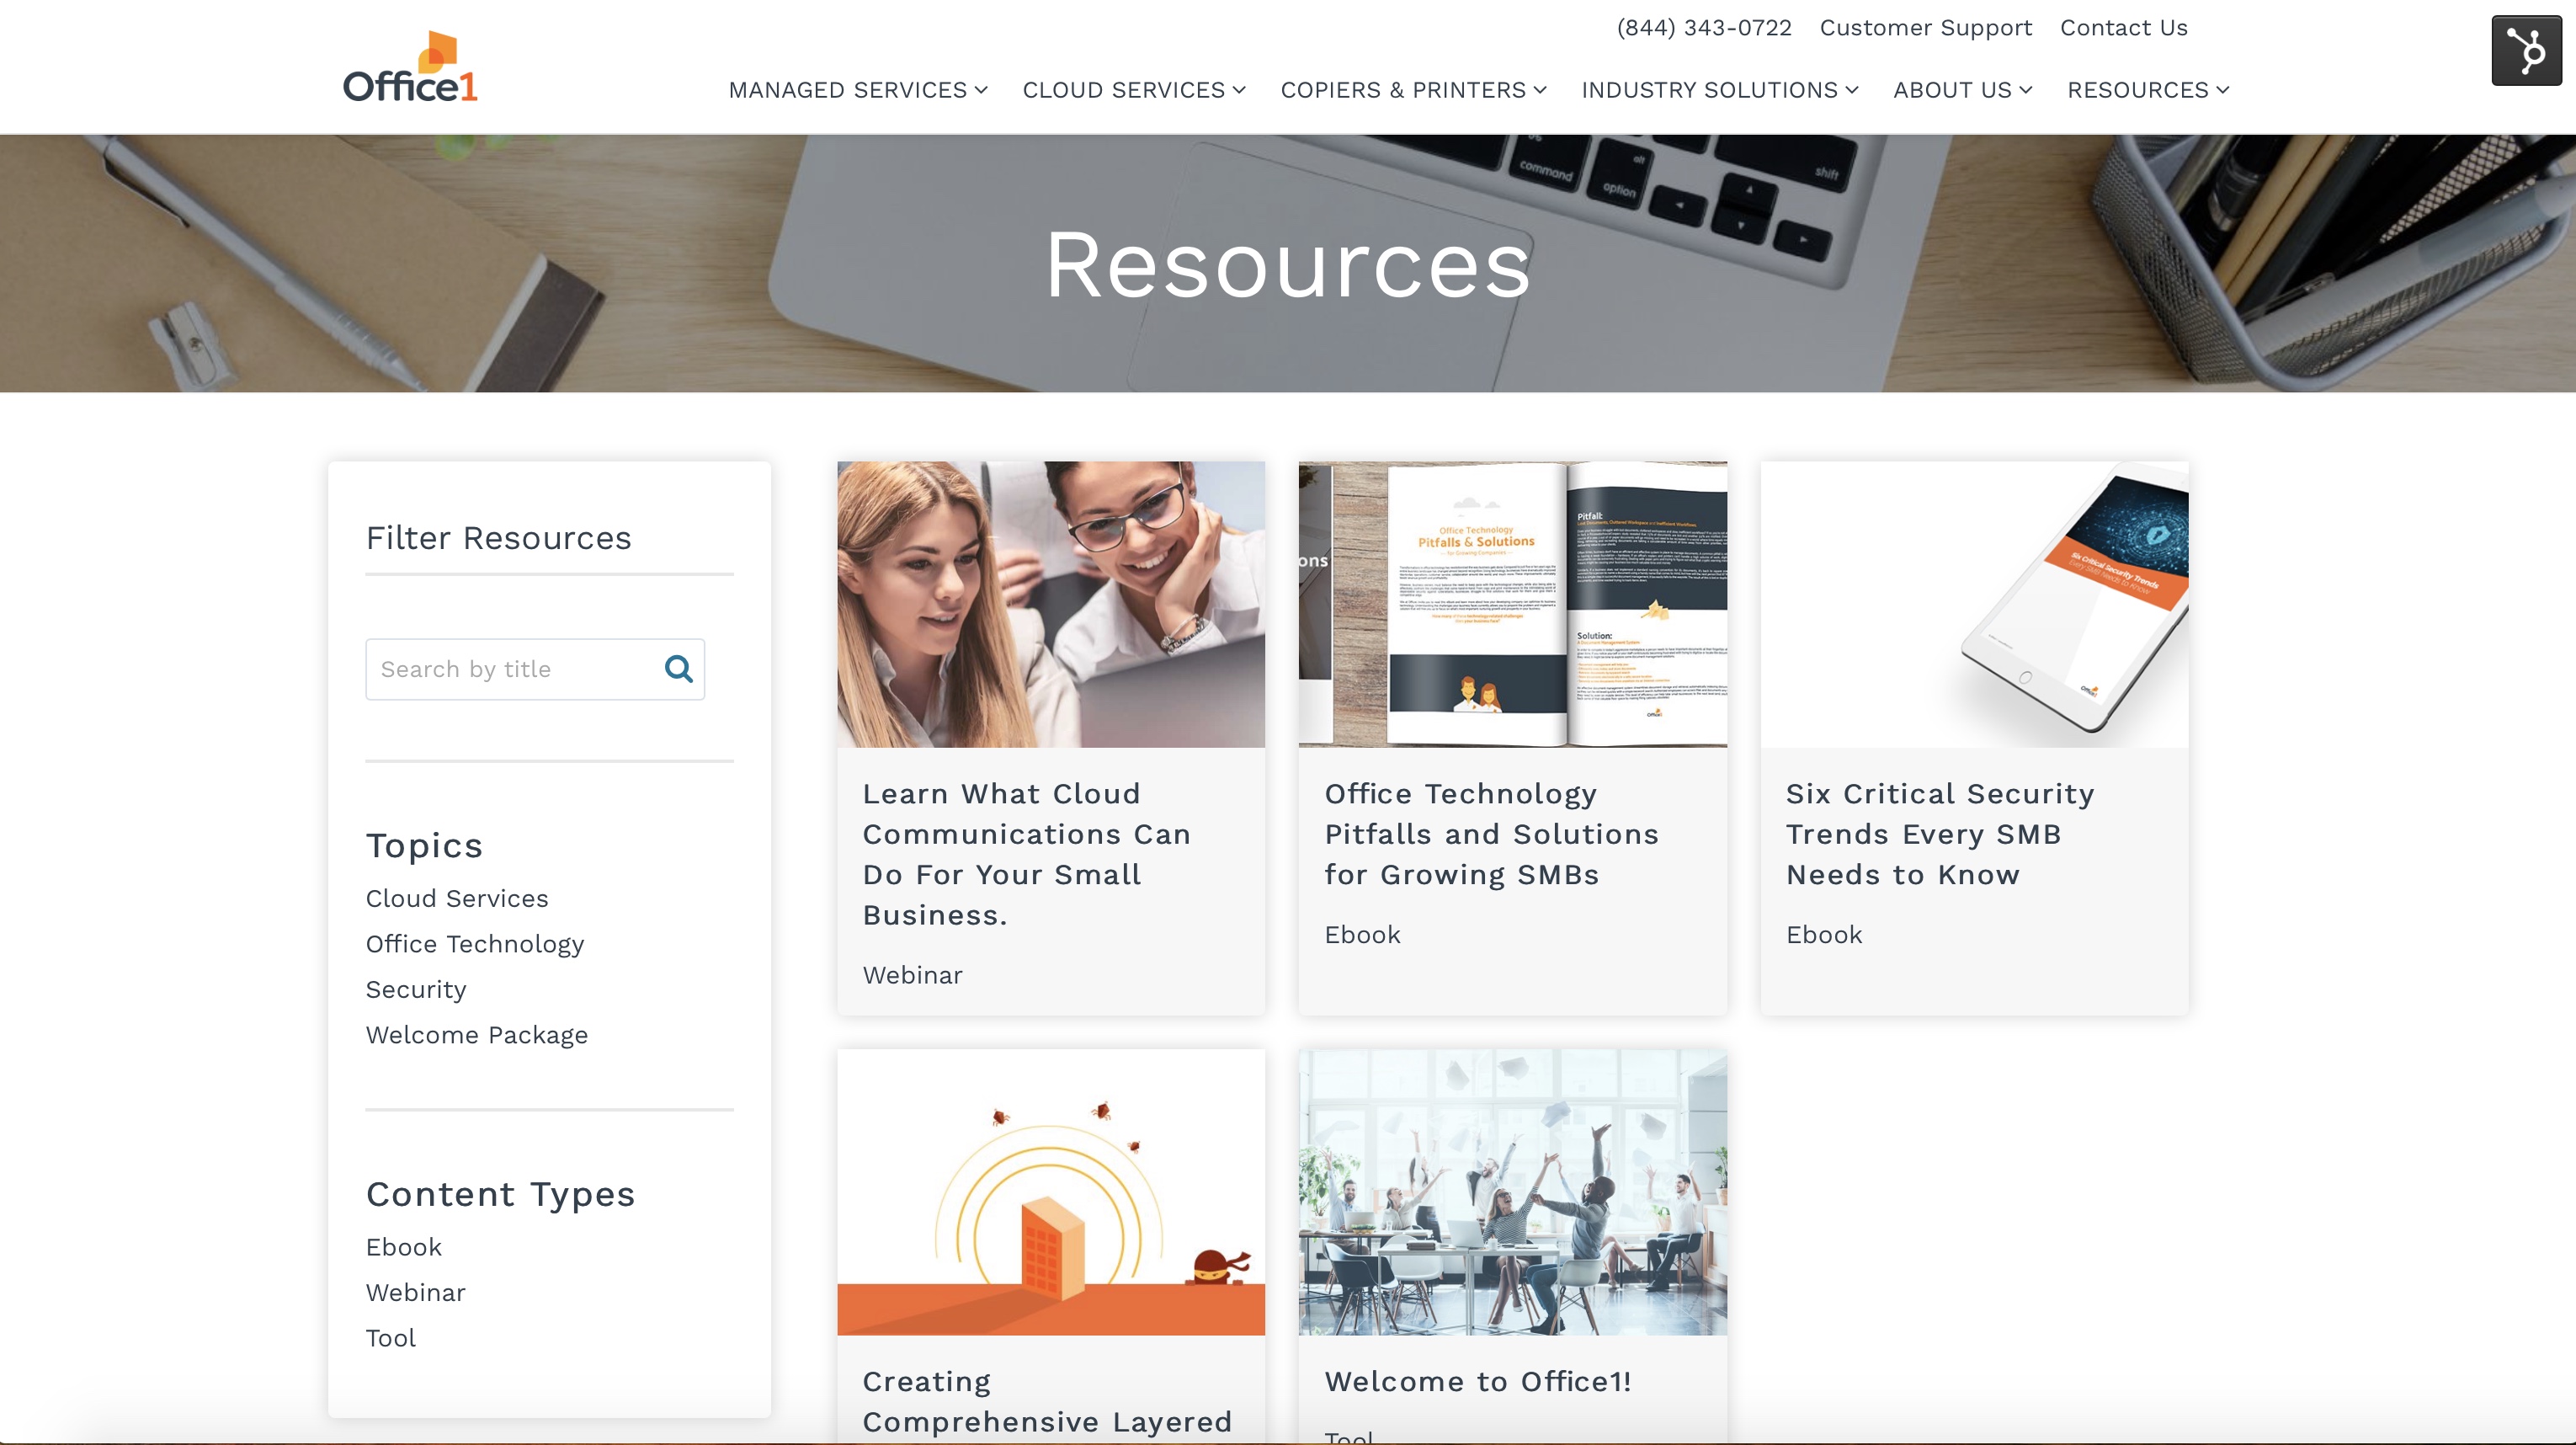 Office1 Resource Page goes live!